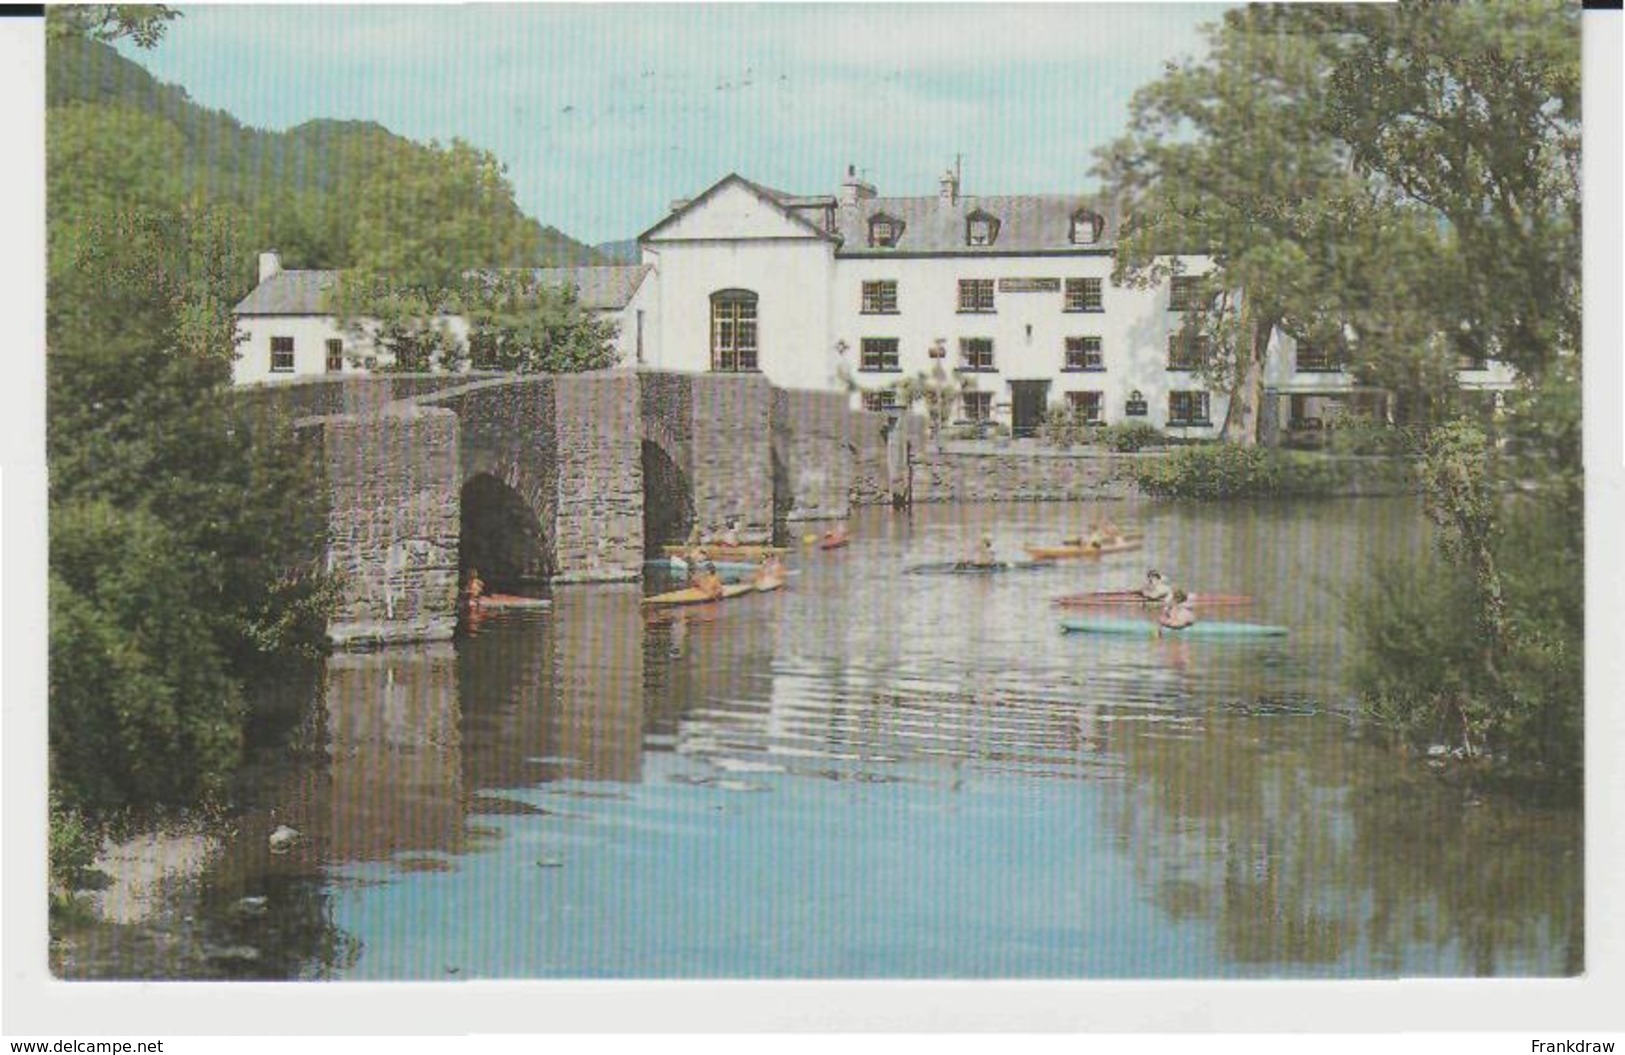 Postcard - Newby Bridge And River Leven, Card No.1040618 - Unused Very Good - Unclassified